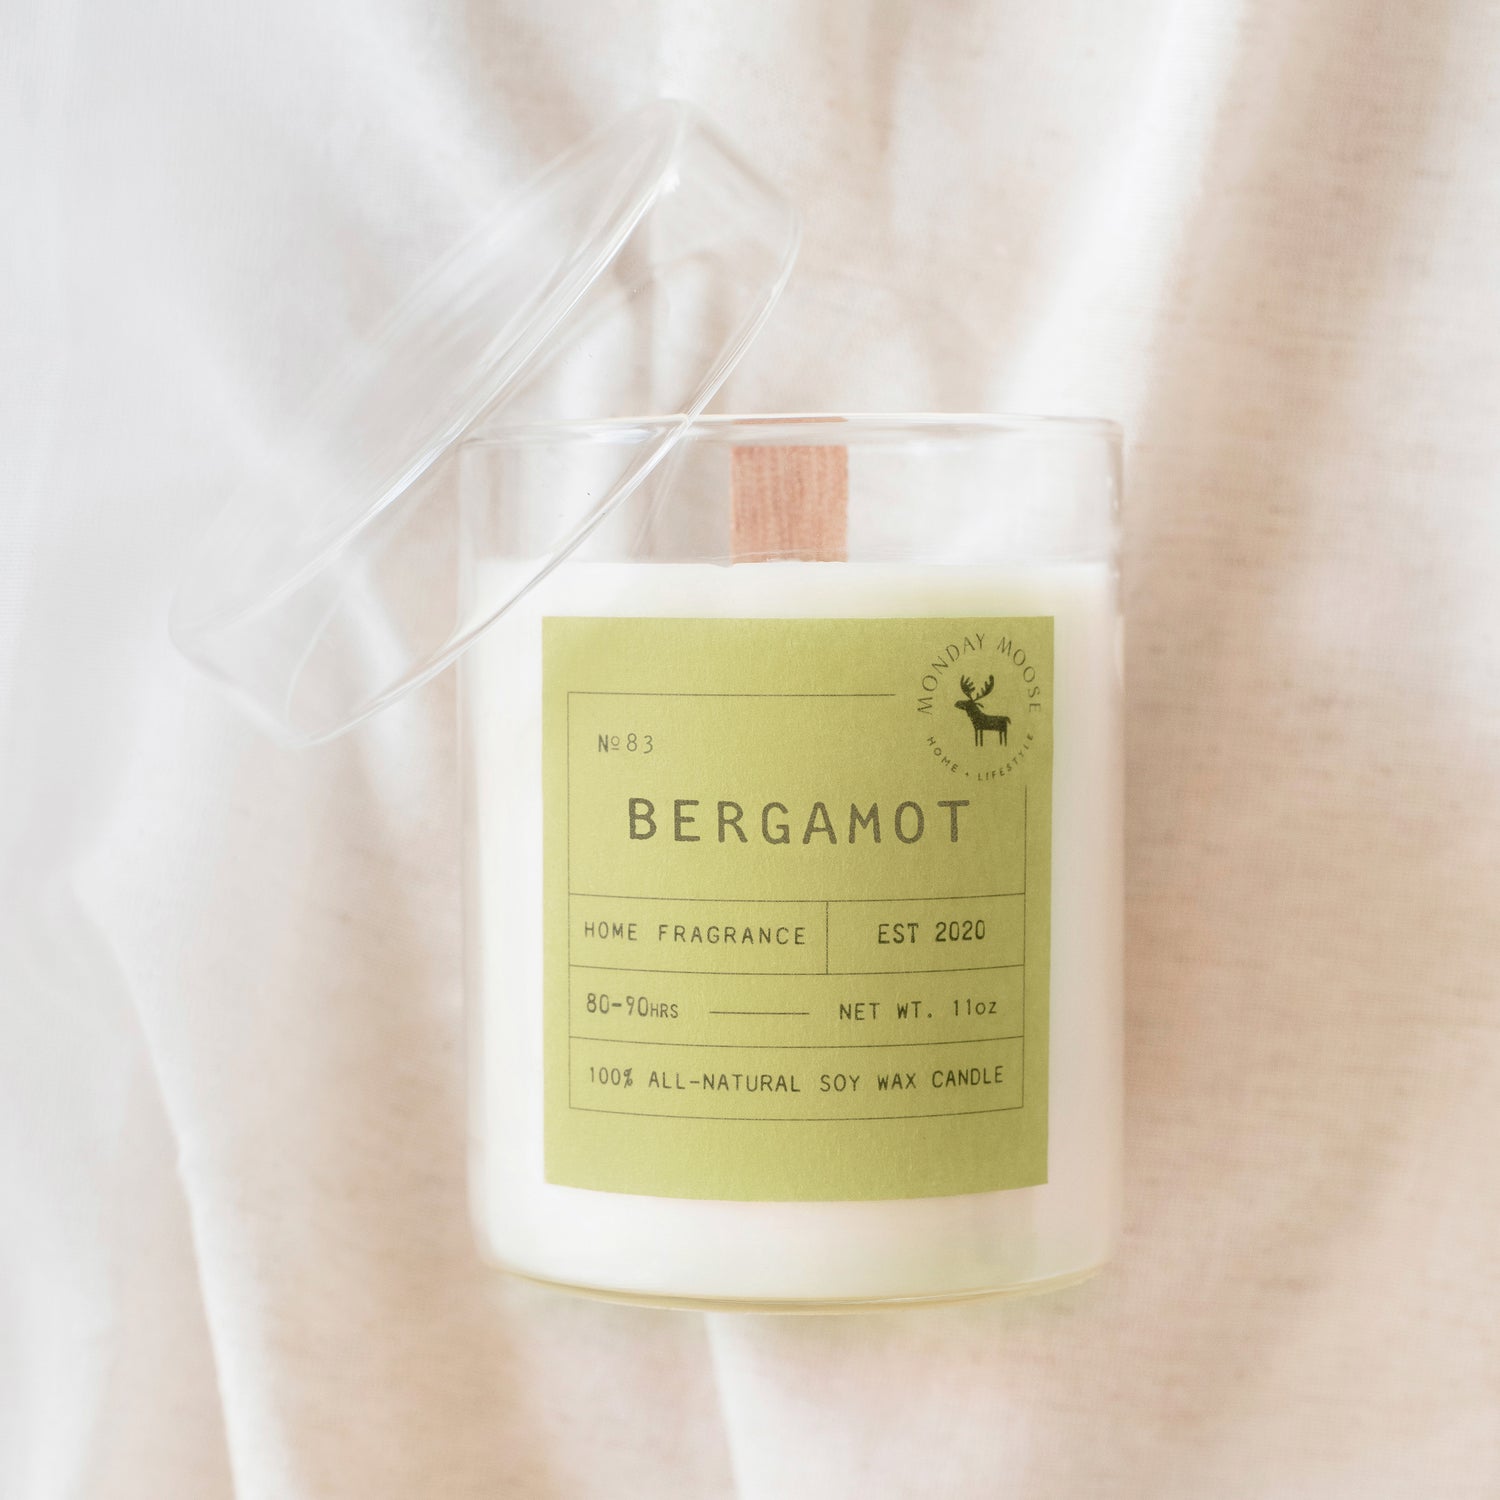 soy wax scented candle home fragrance bergamot